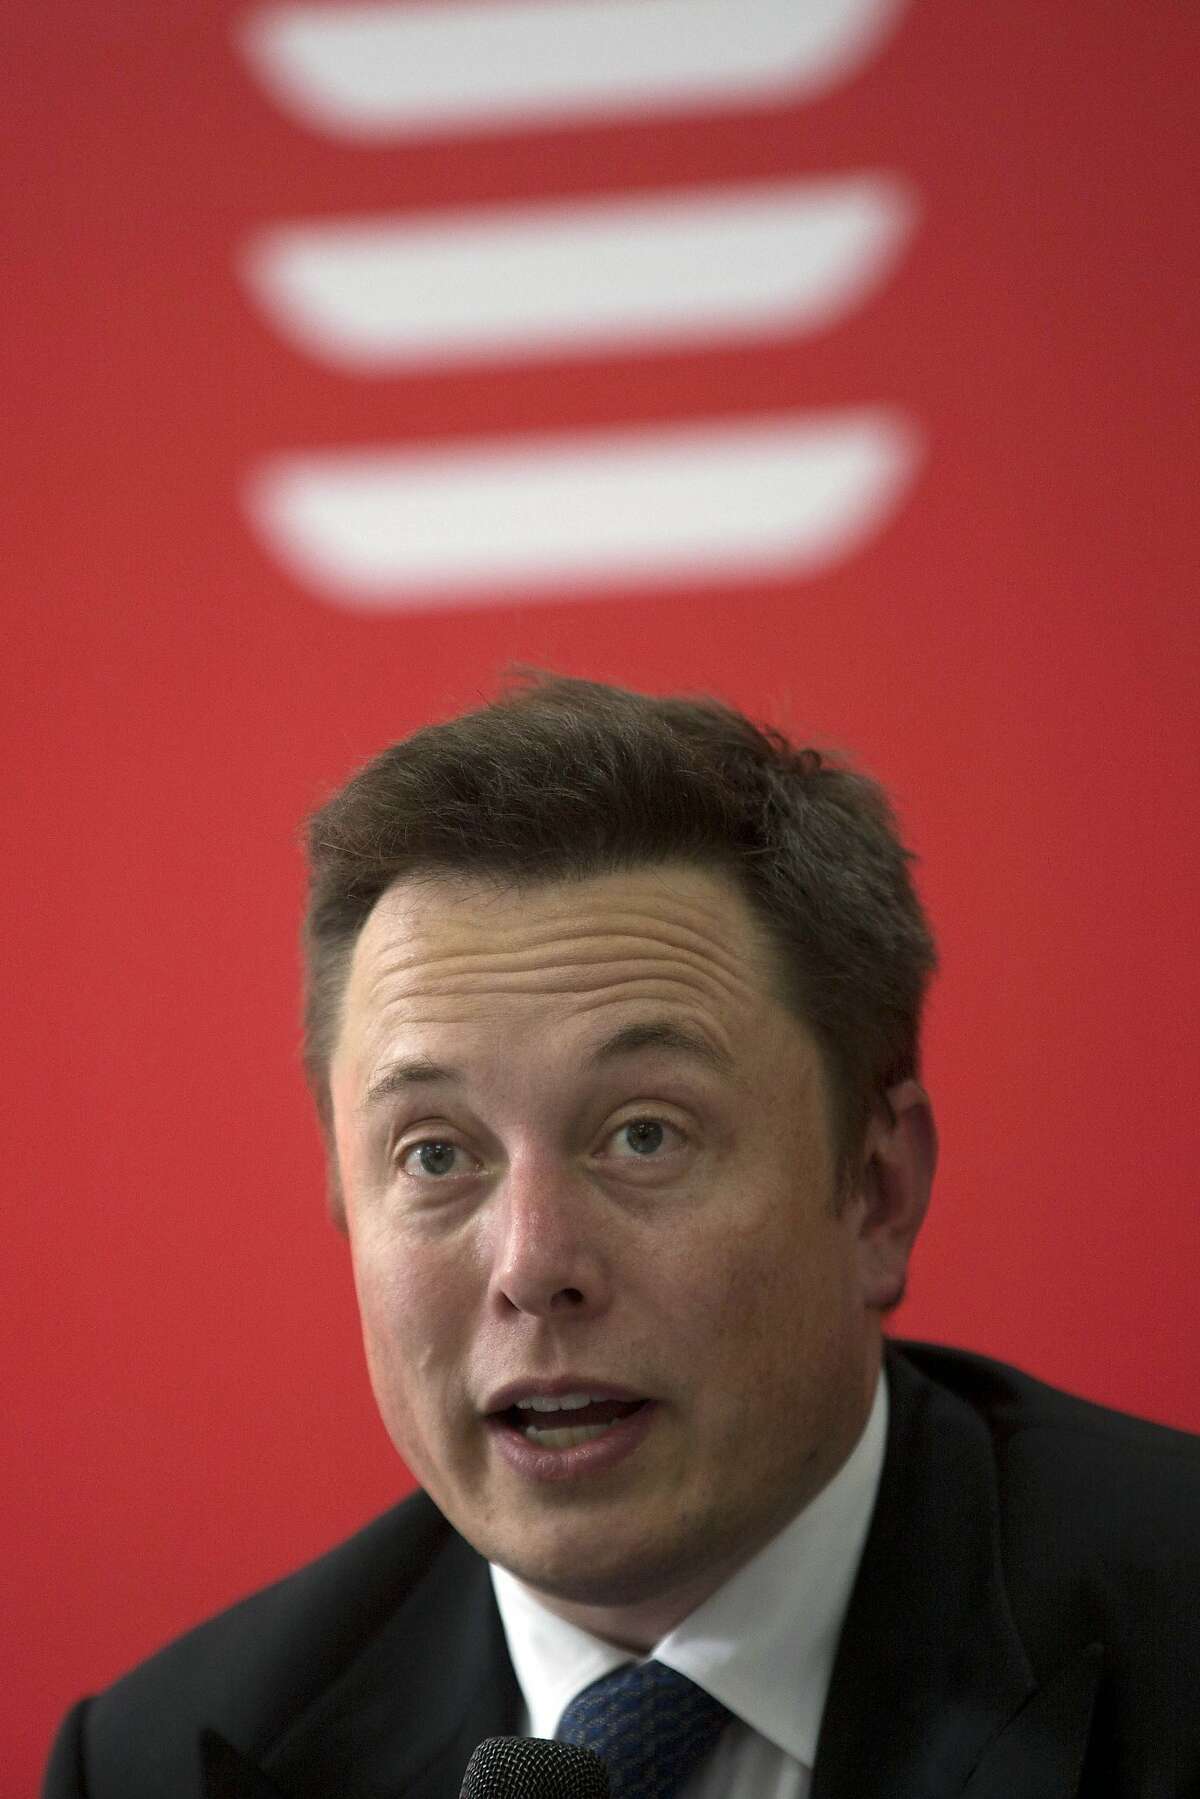 Tesla CEO Elon Musk s pay slips to less than